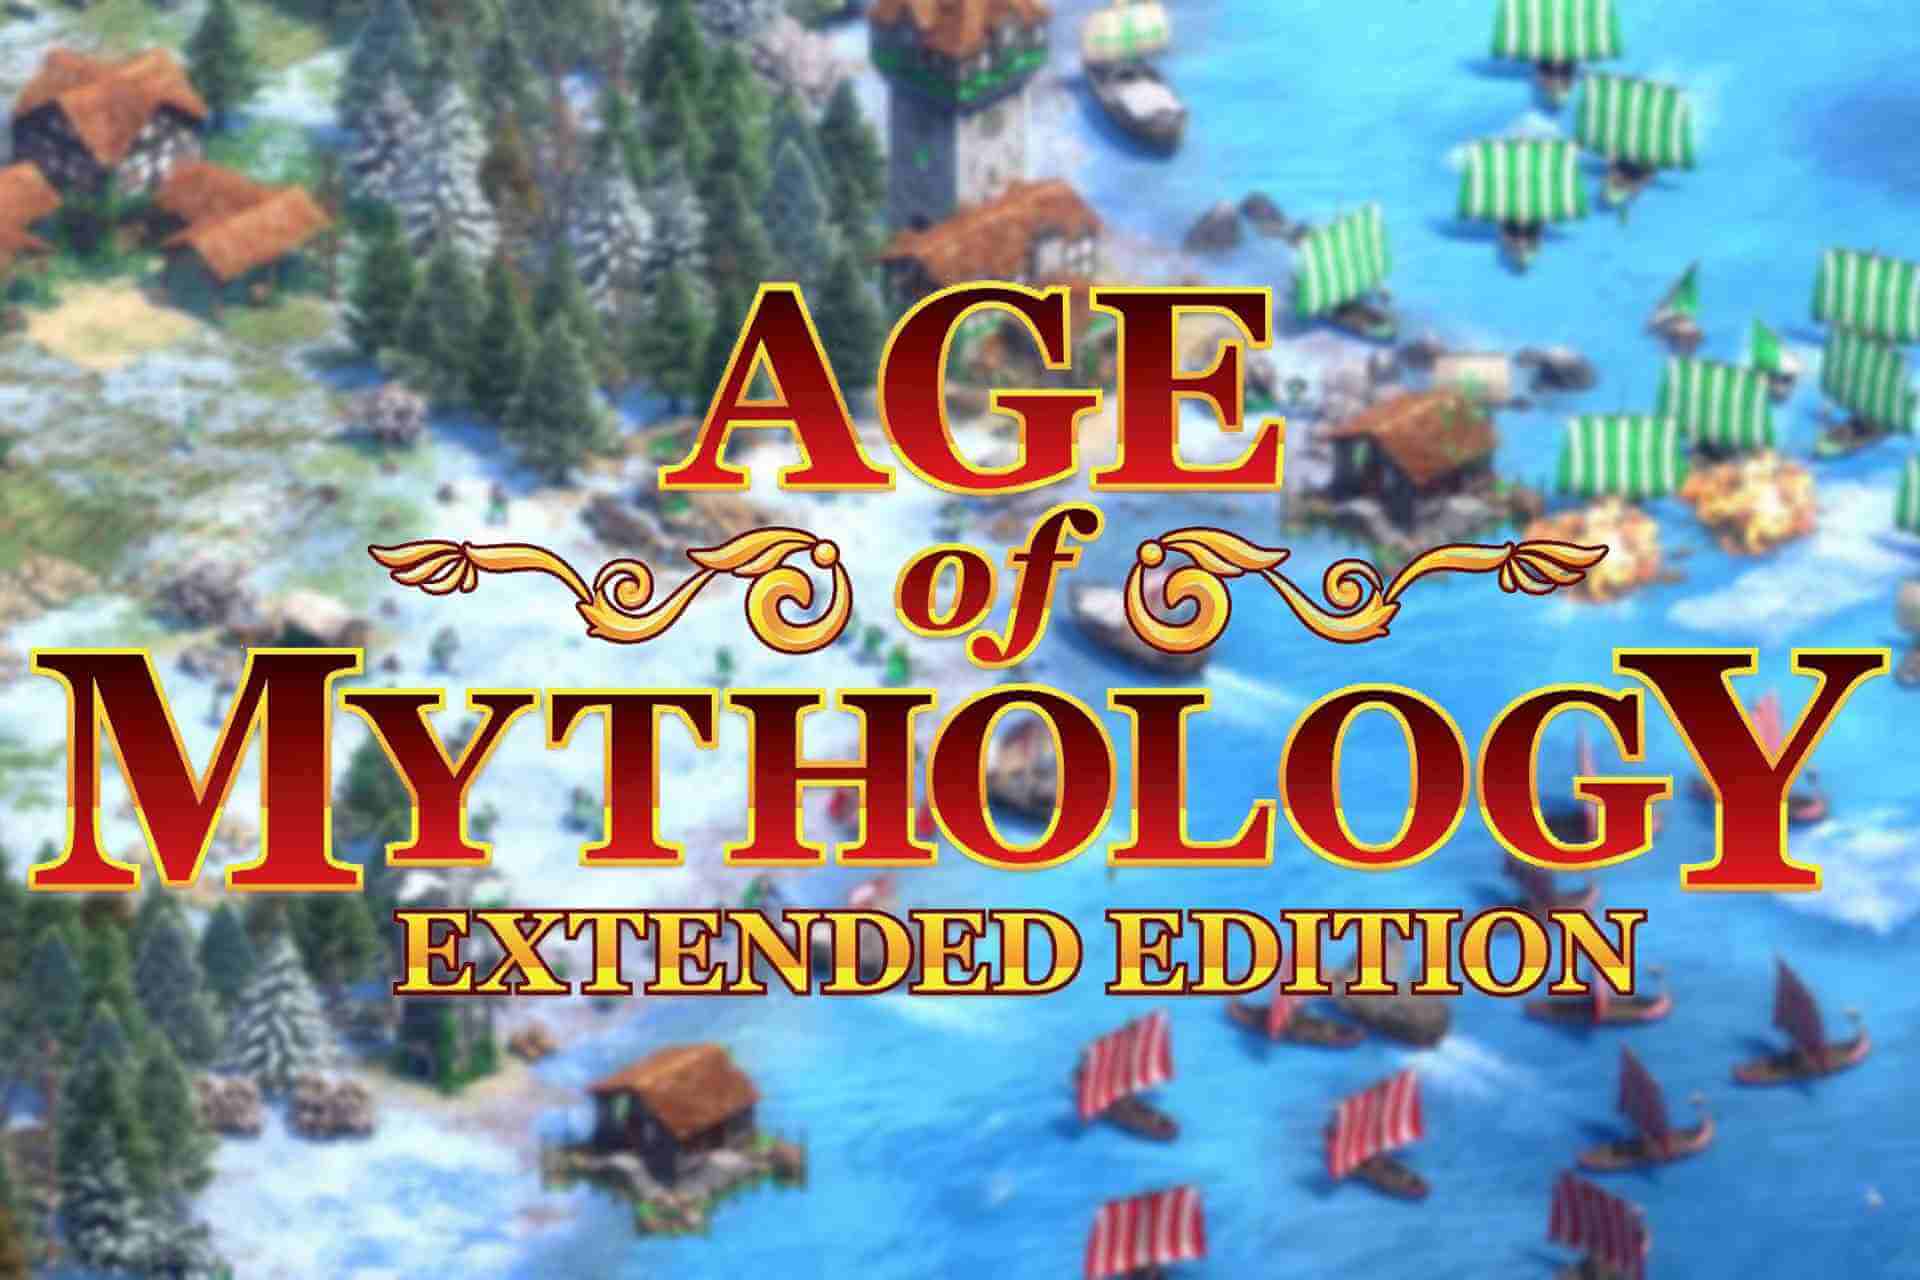 cheat codes for age mythology extended edition with tales of dragon